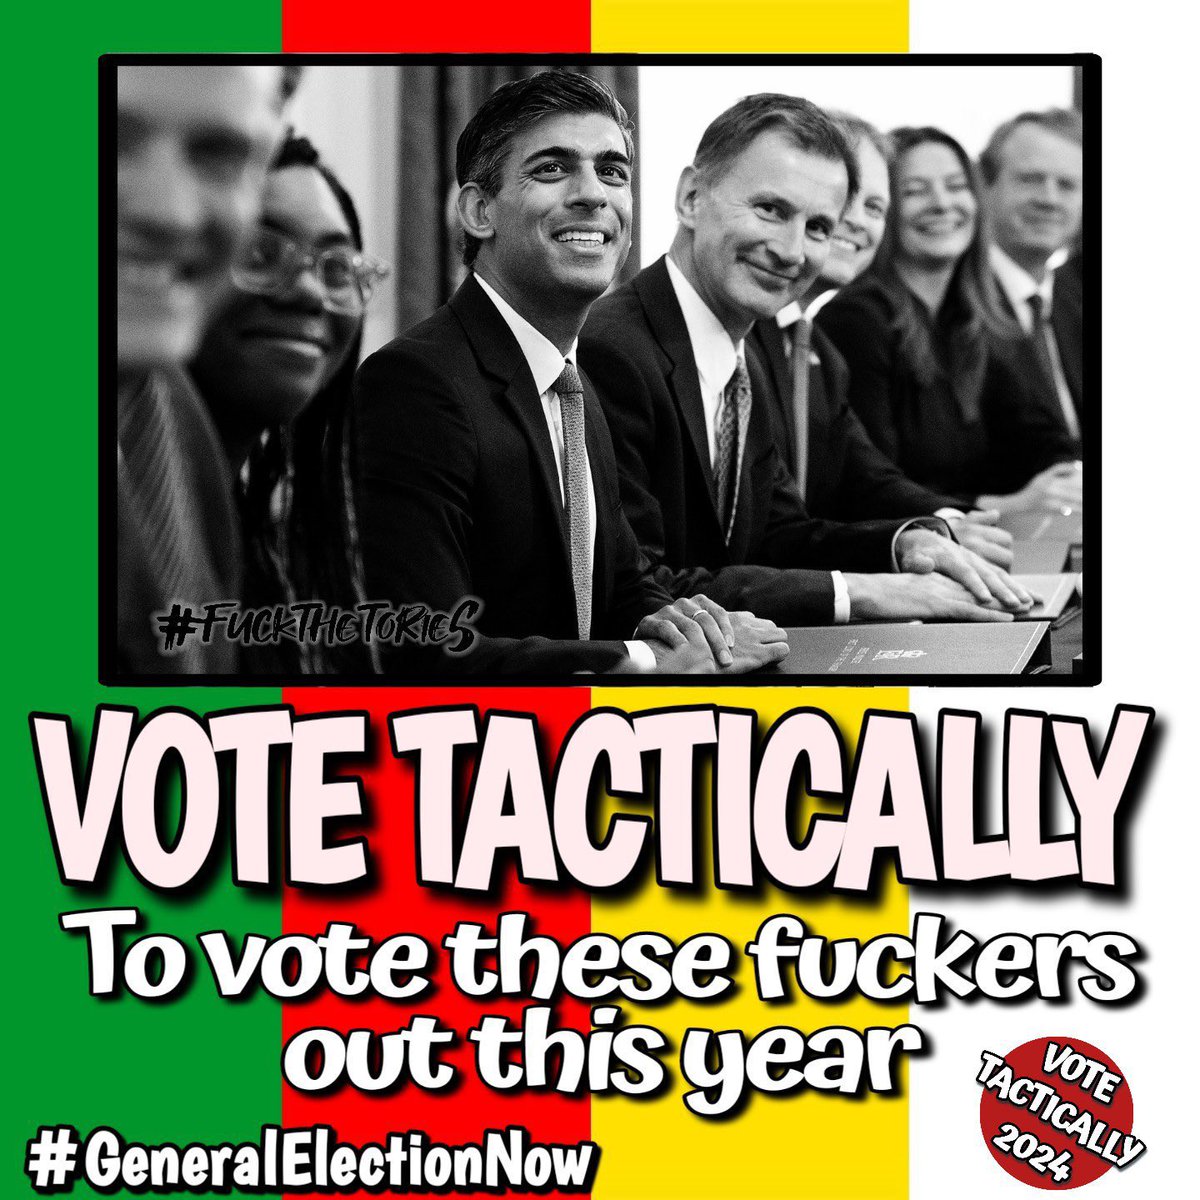 Tactical voting sites not much help yet, they’re either updating &/or constituencies subject to boundary changes w/ no previous results 

Was a Tory stronghold where I am w/ #LibDems 2nd

See what develops once #GeneralElectionNow date announced🤷🏻

#ToriesOut620 #VoteTactically